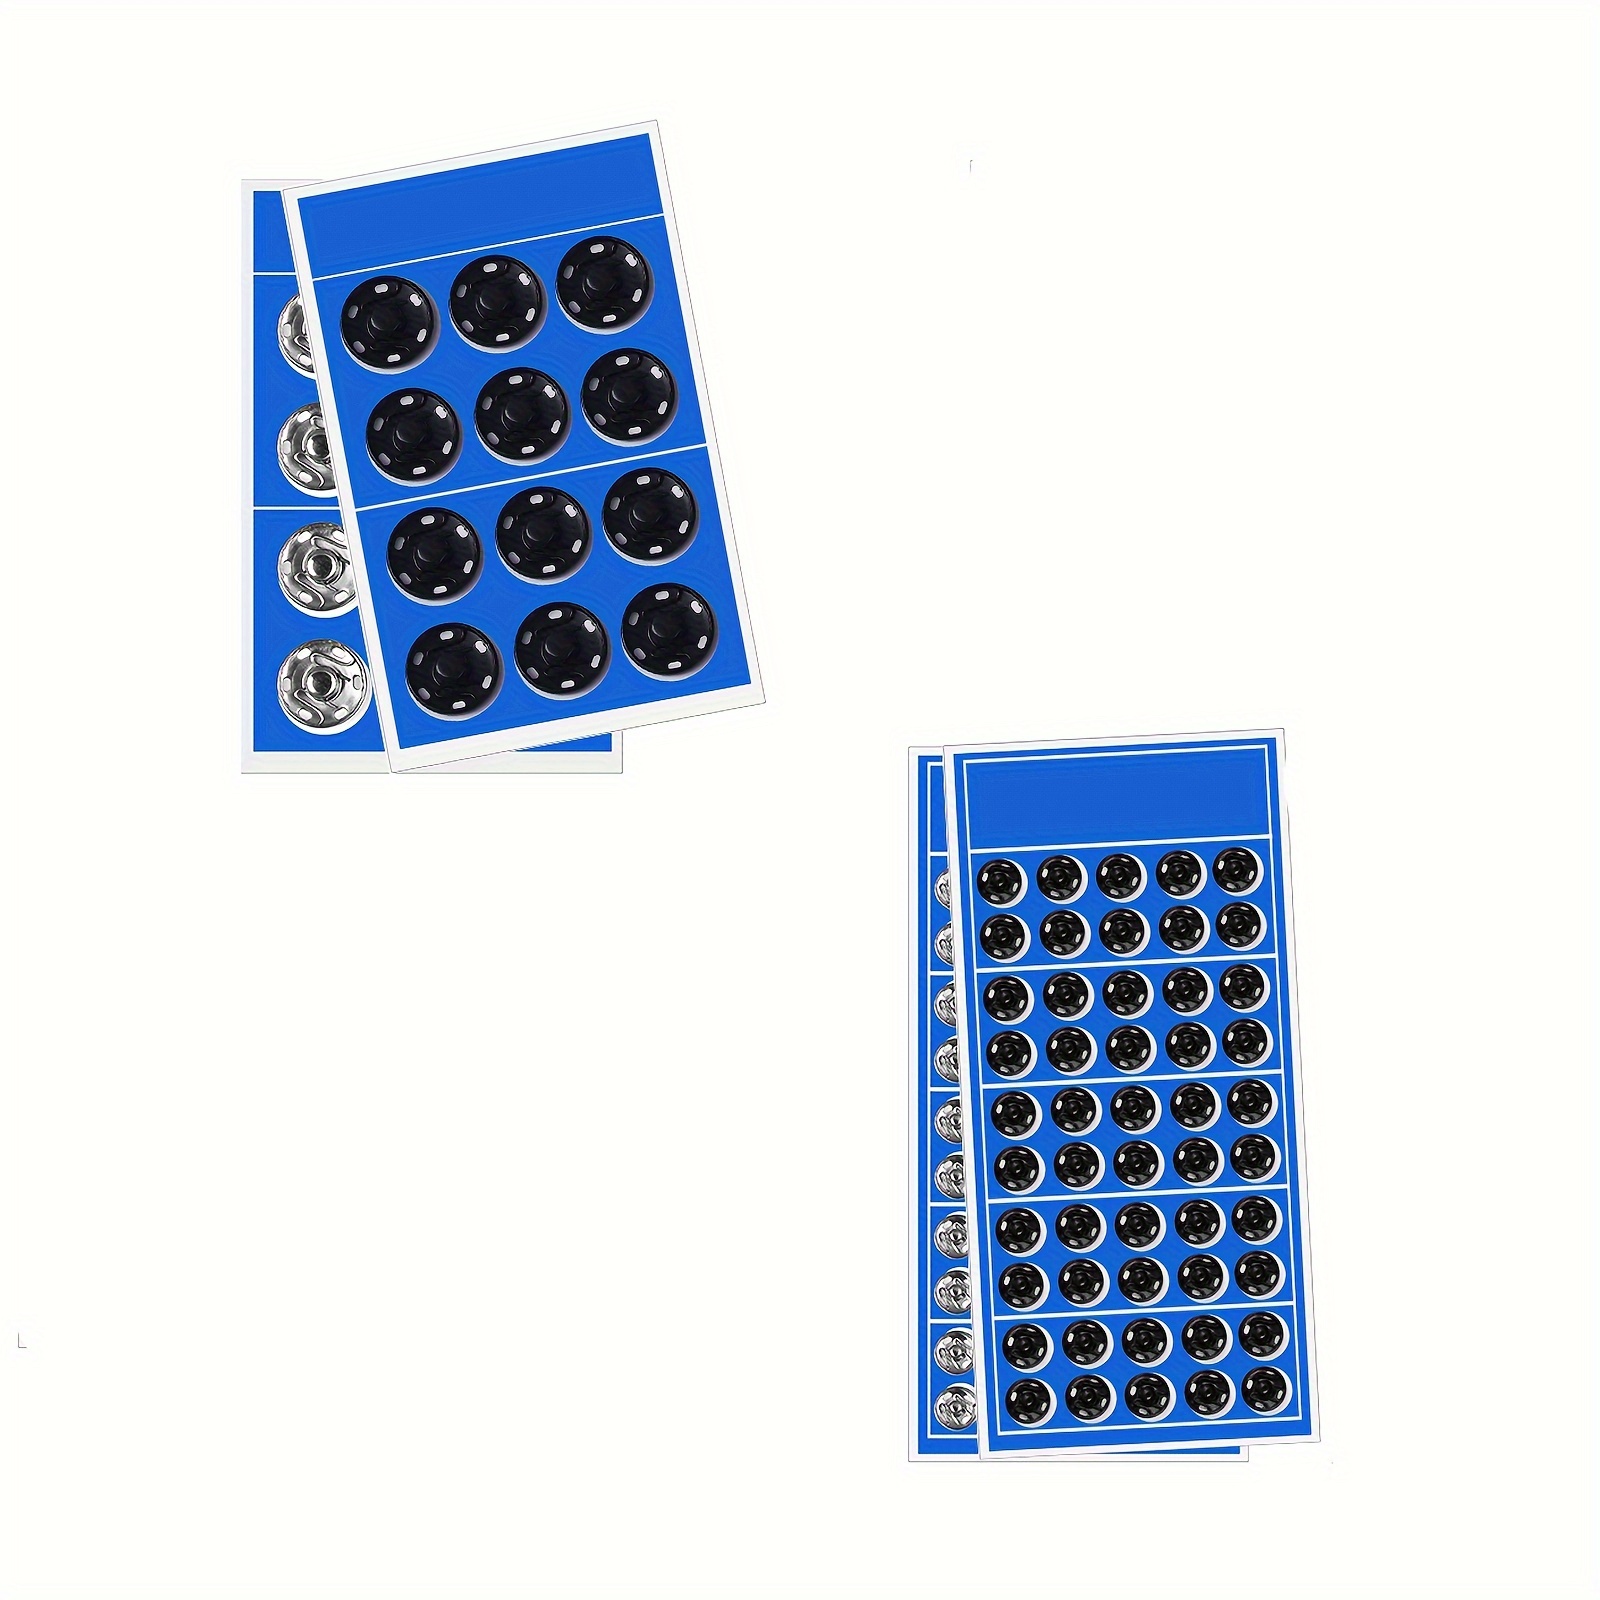 12 50pcs black white small metal snap fasteners press button stud sewing clothing accessories embedded buckle wide use